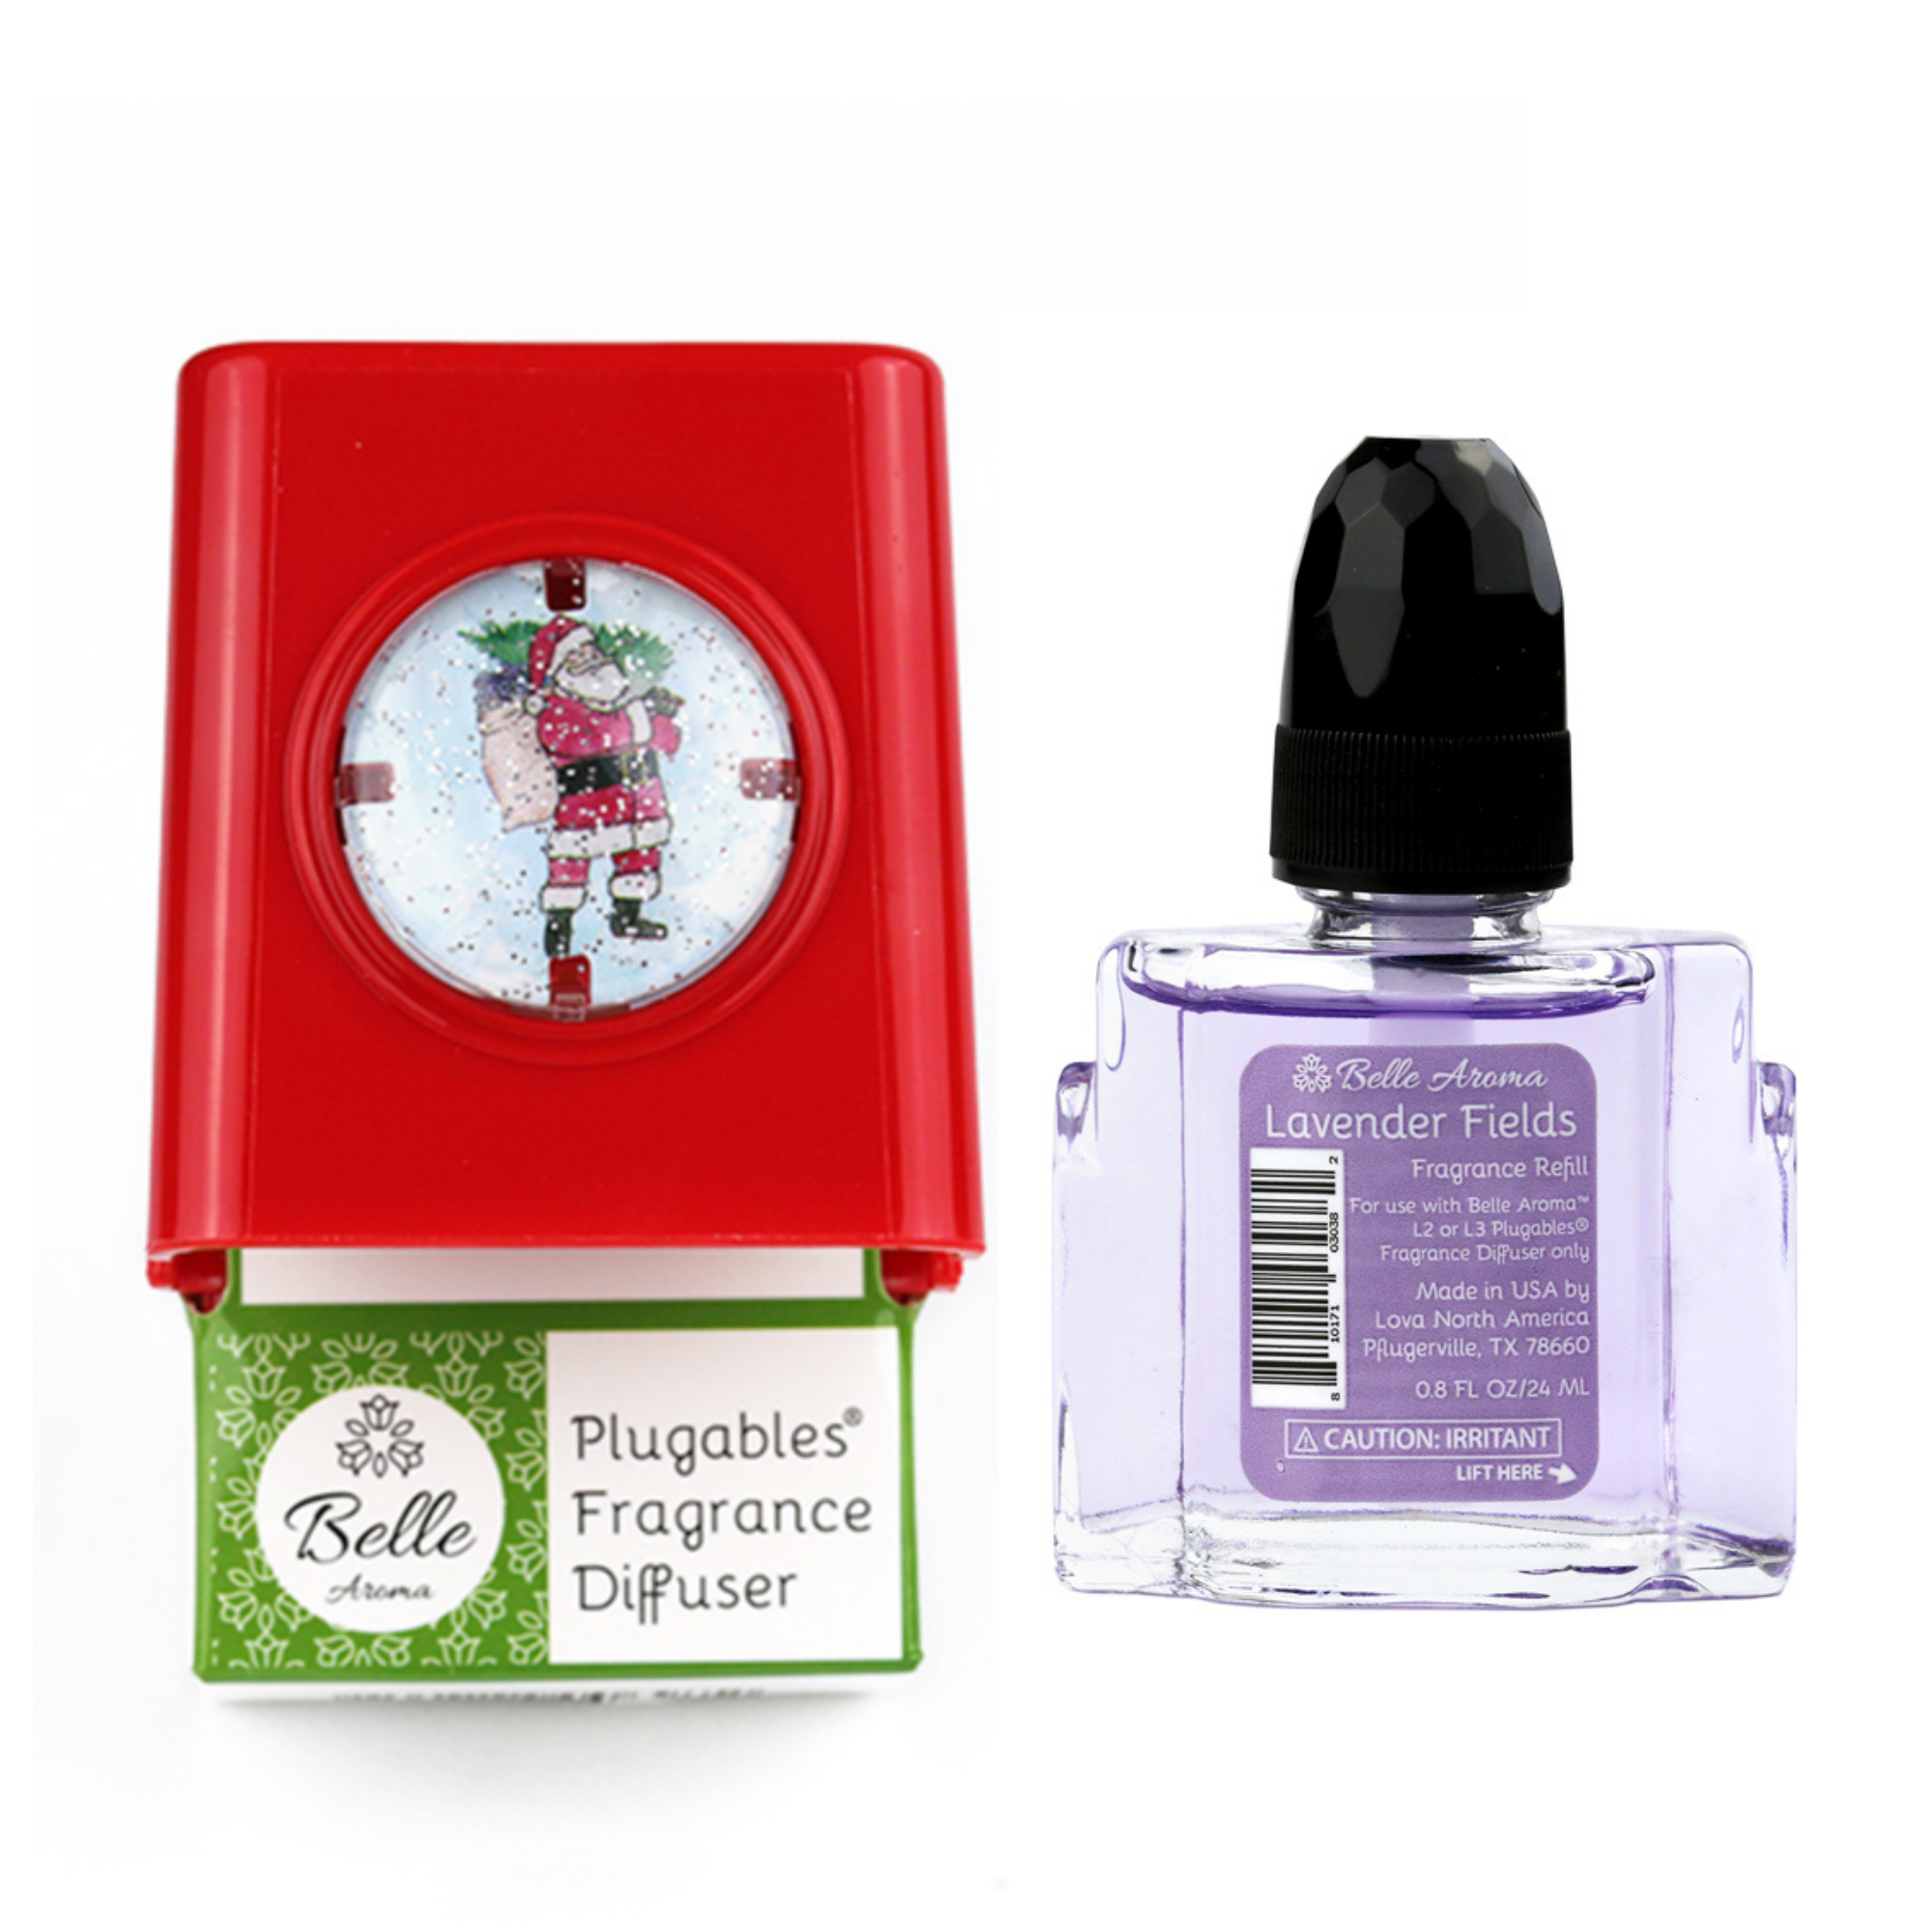 Glitter Domes™ Plugables® Electric Scented Oil Diffuser - Santa with Lavender Fields Fragrance Oil Home Fragrance Accessories